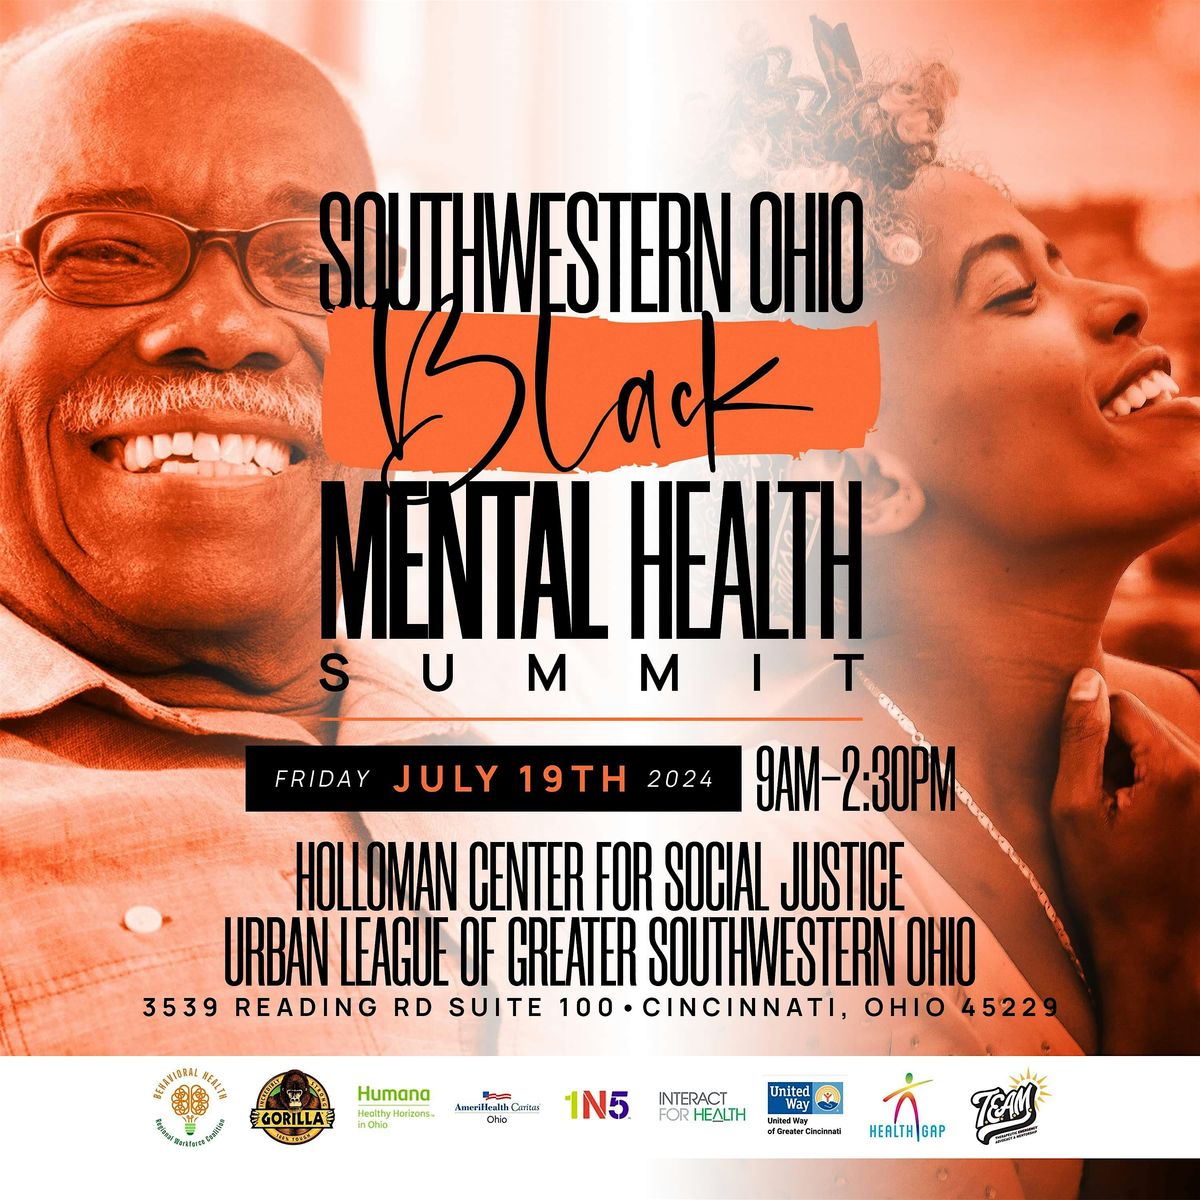 Southwestern Ohio Black Mental Health Summit for Practitioners